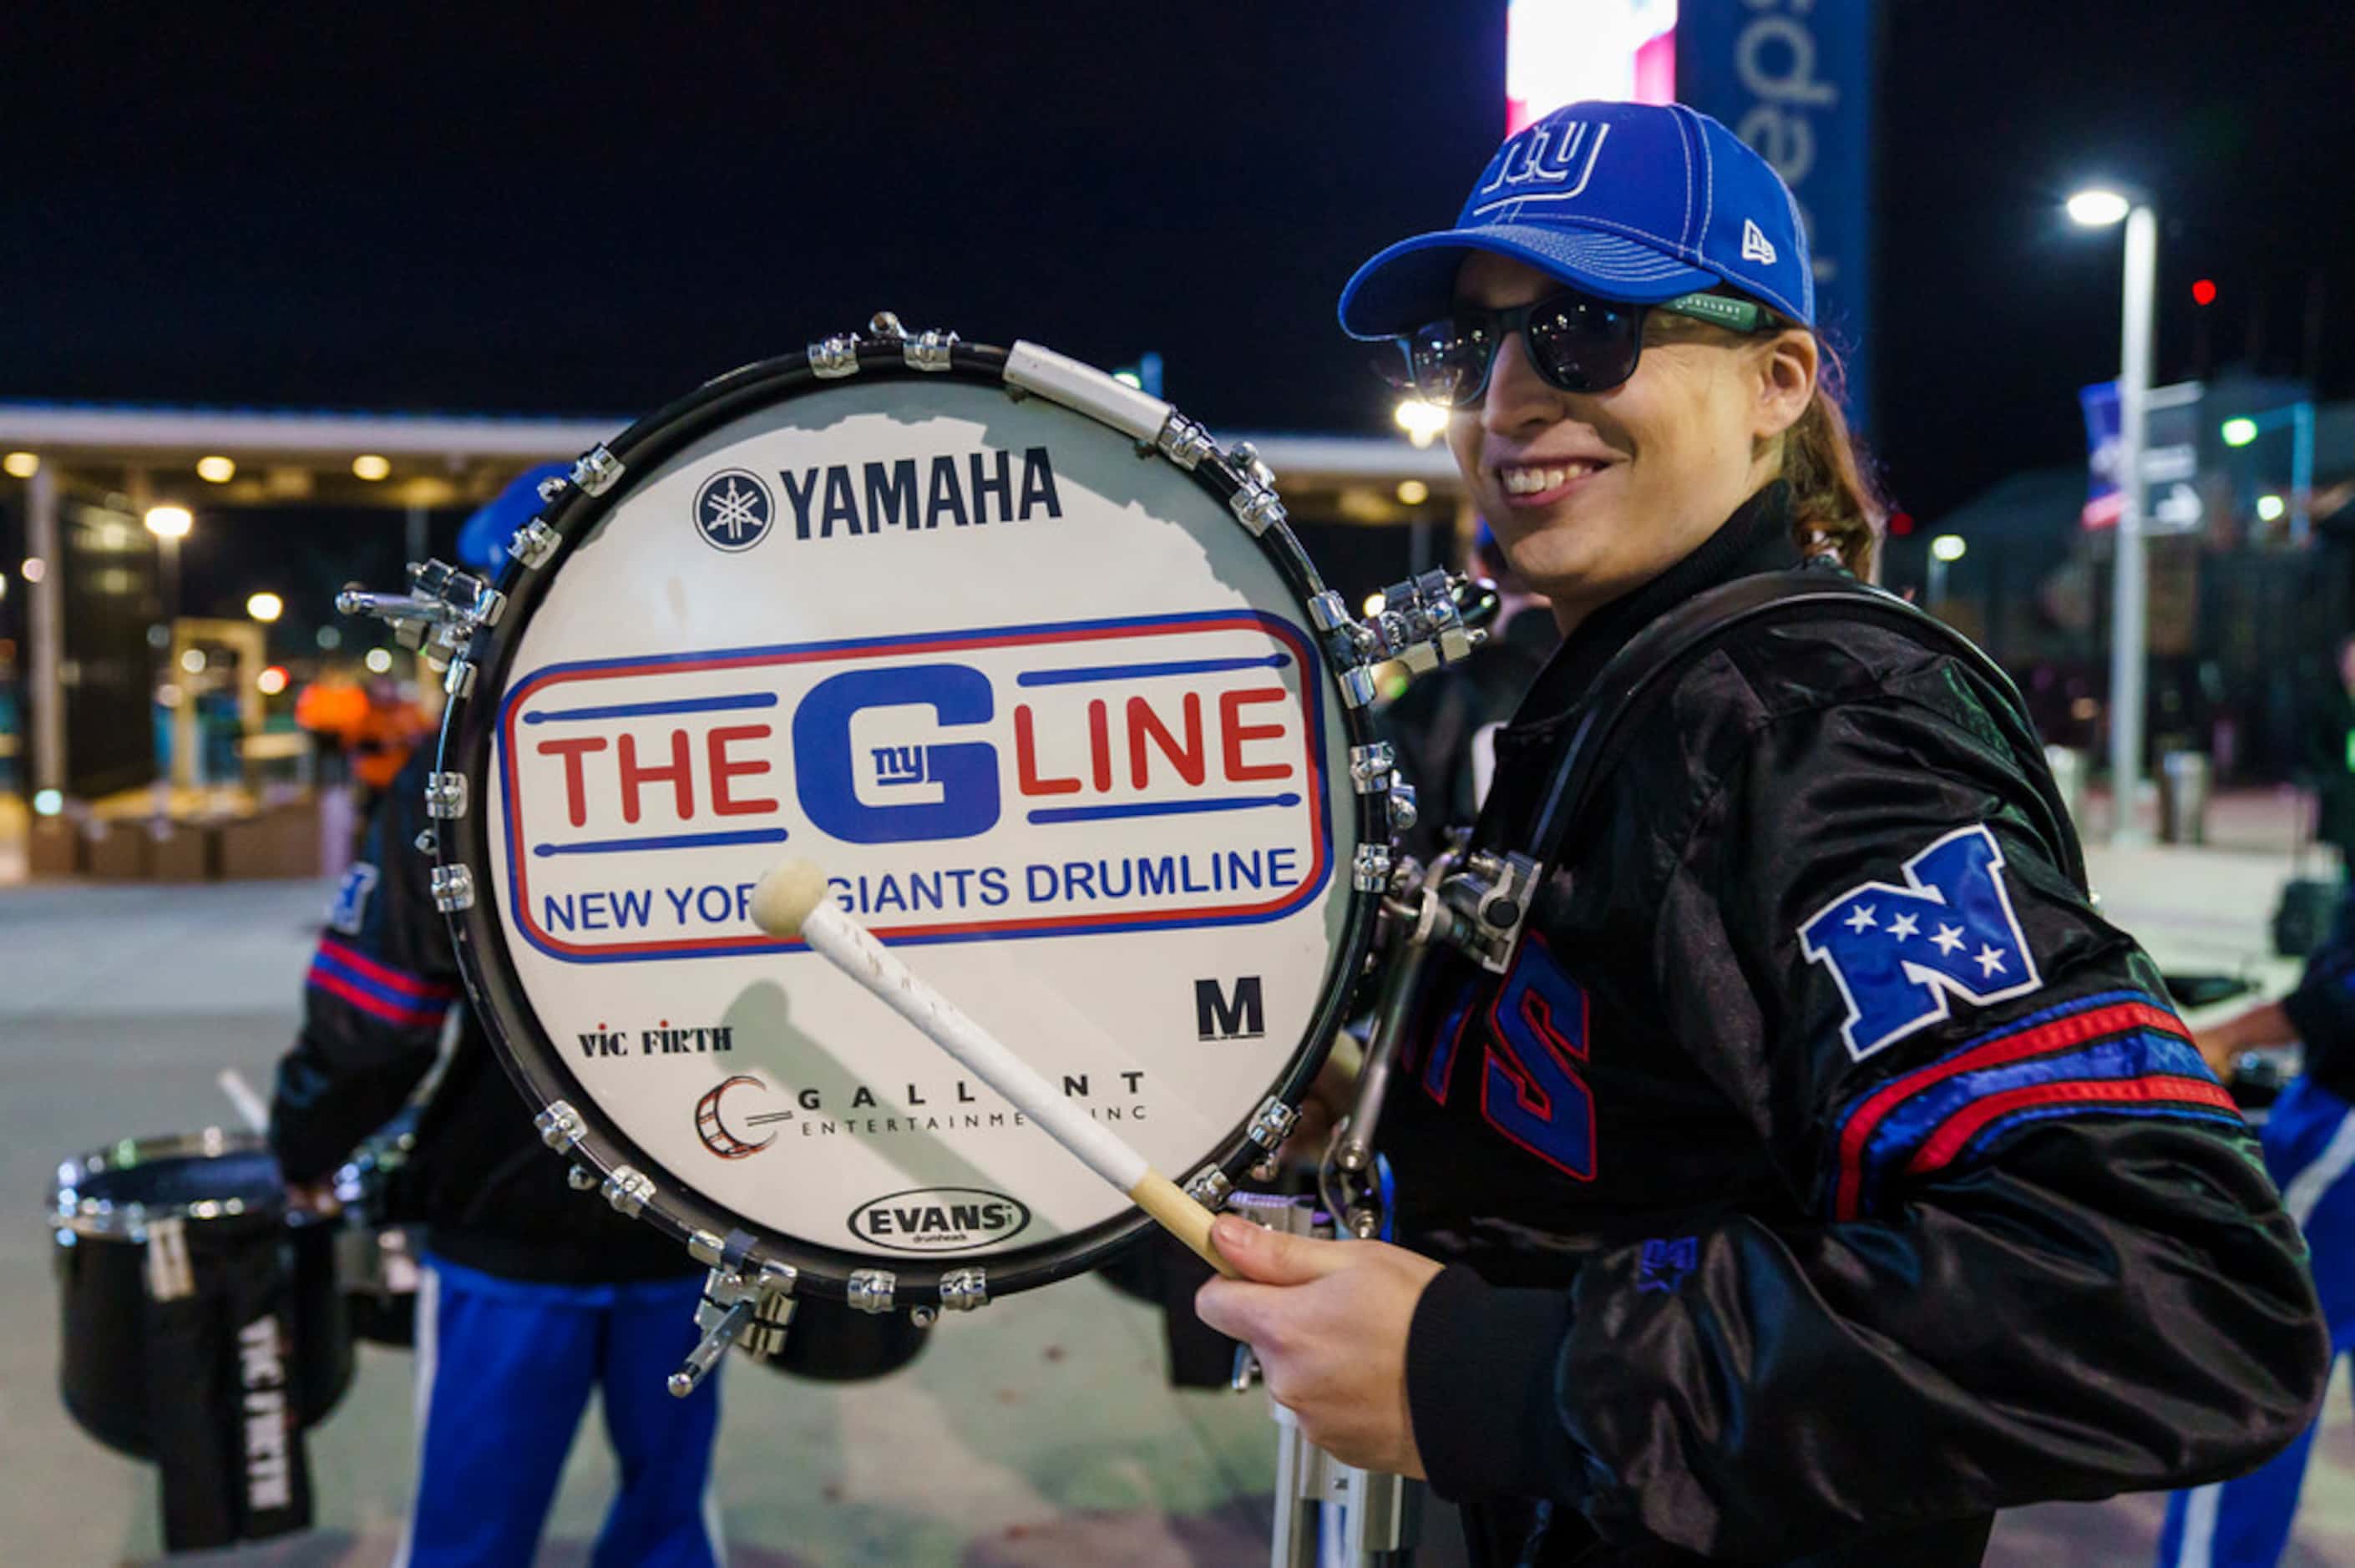 New York Giants drum line performs outside the stadium as fans tailgate before a Monday...